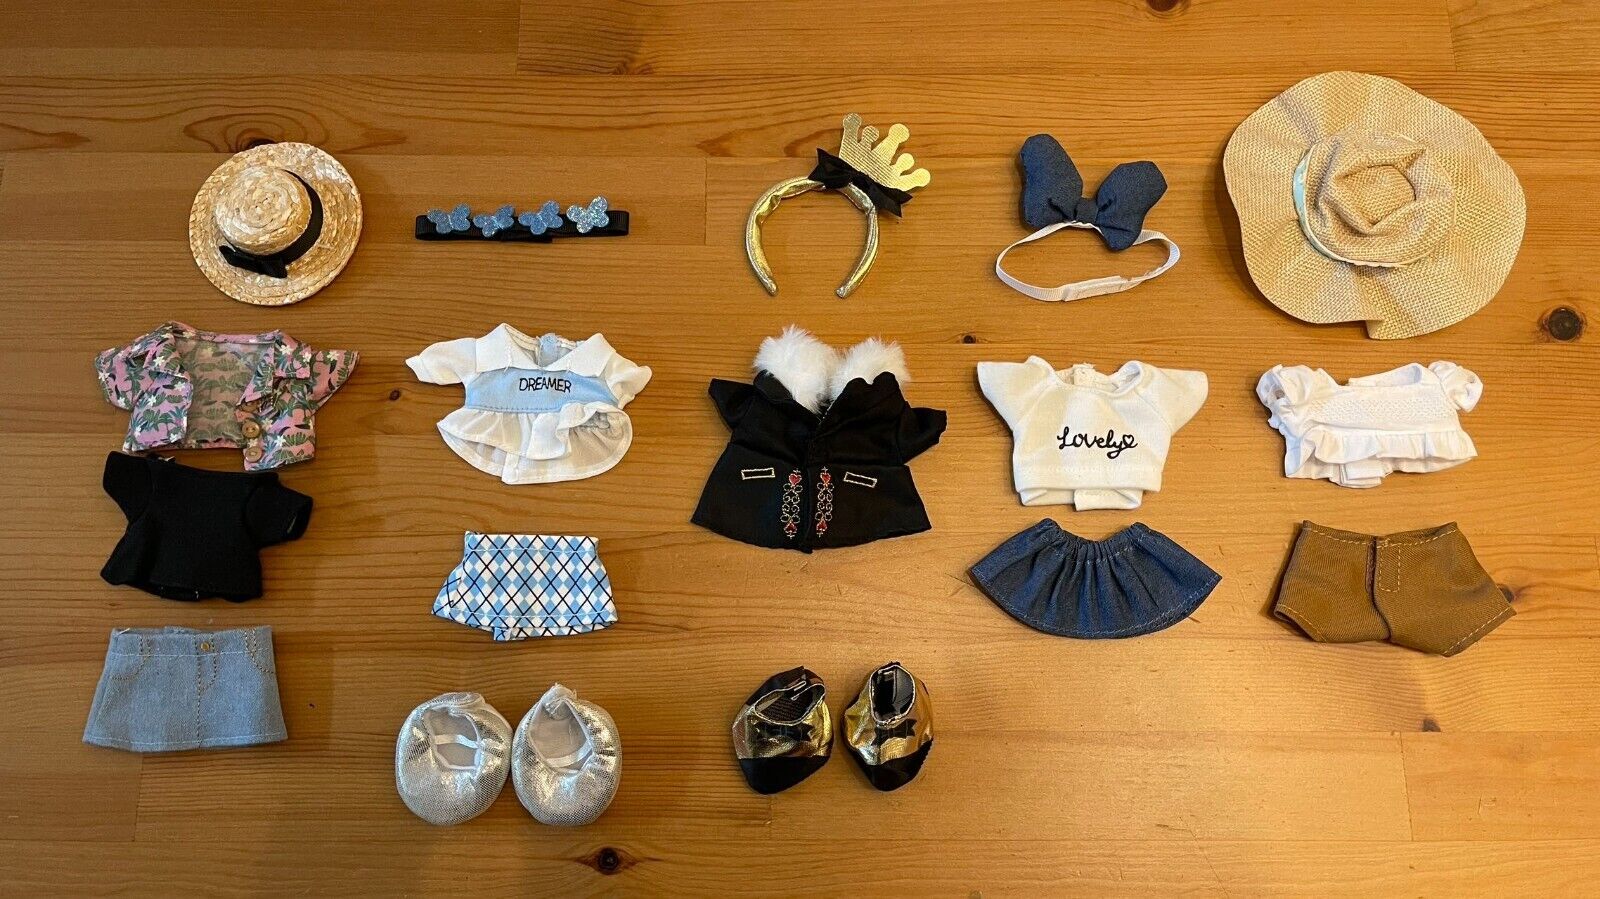 19 sets of Disney nuiMOs outfits